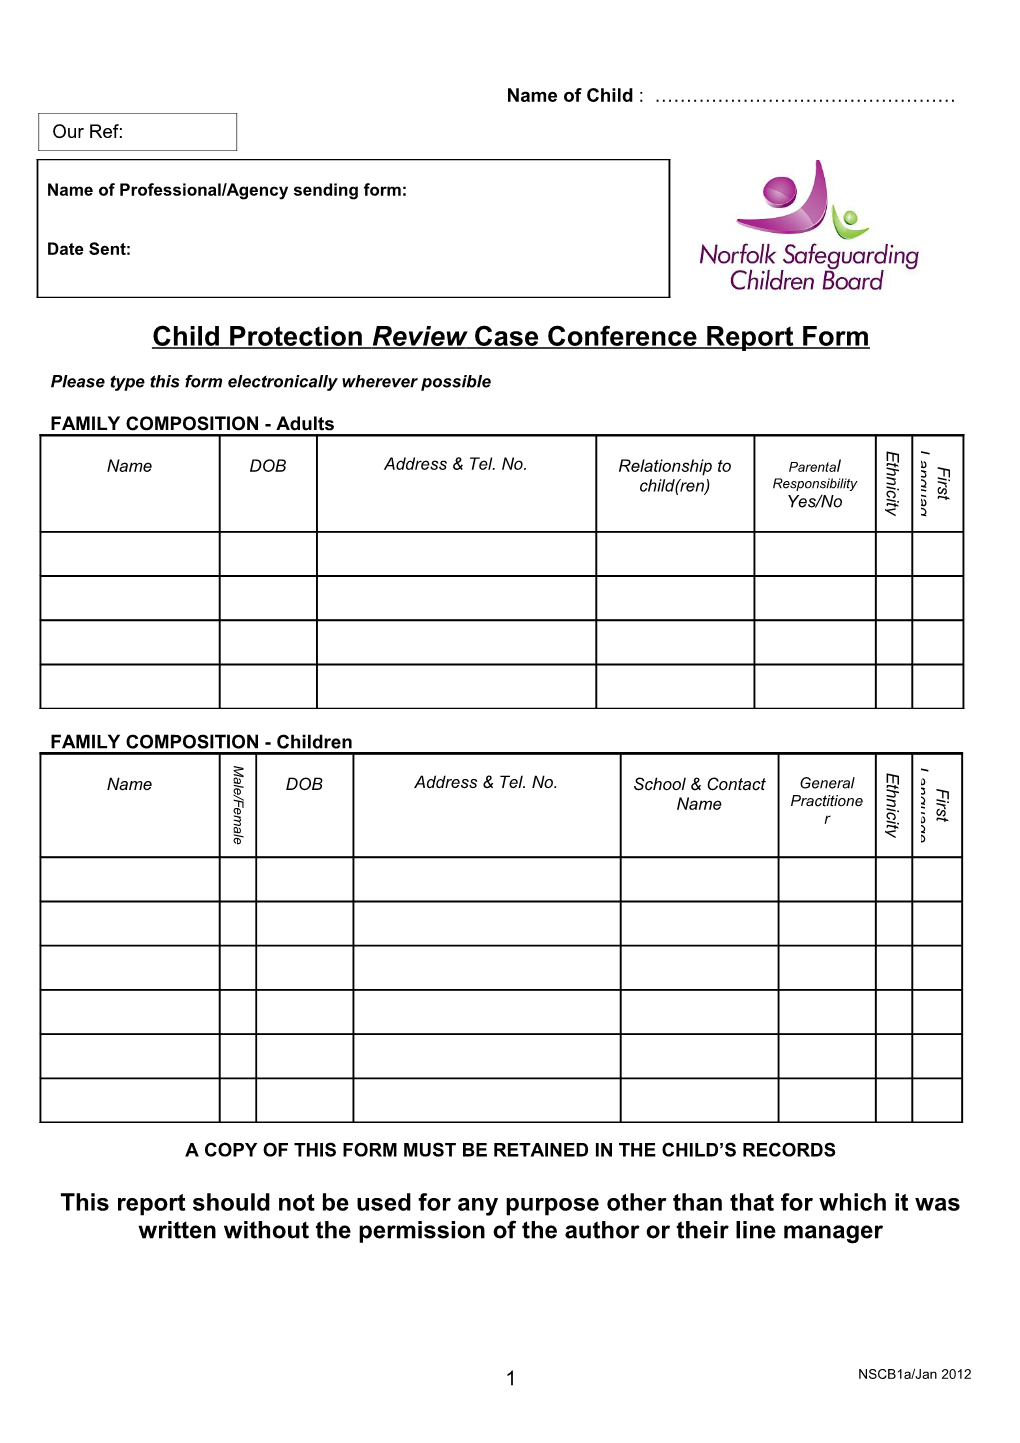 Child Protection Review Case Conference Report Form